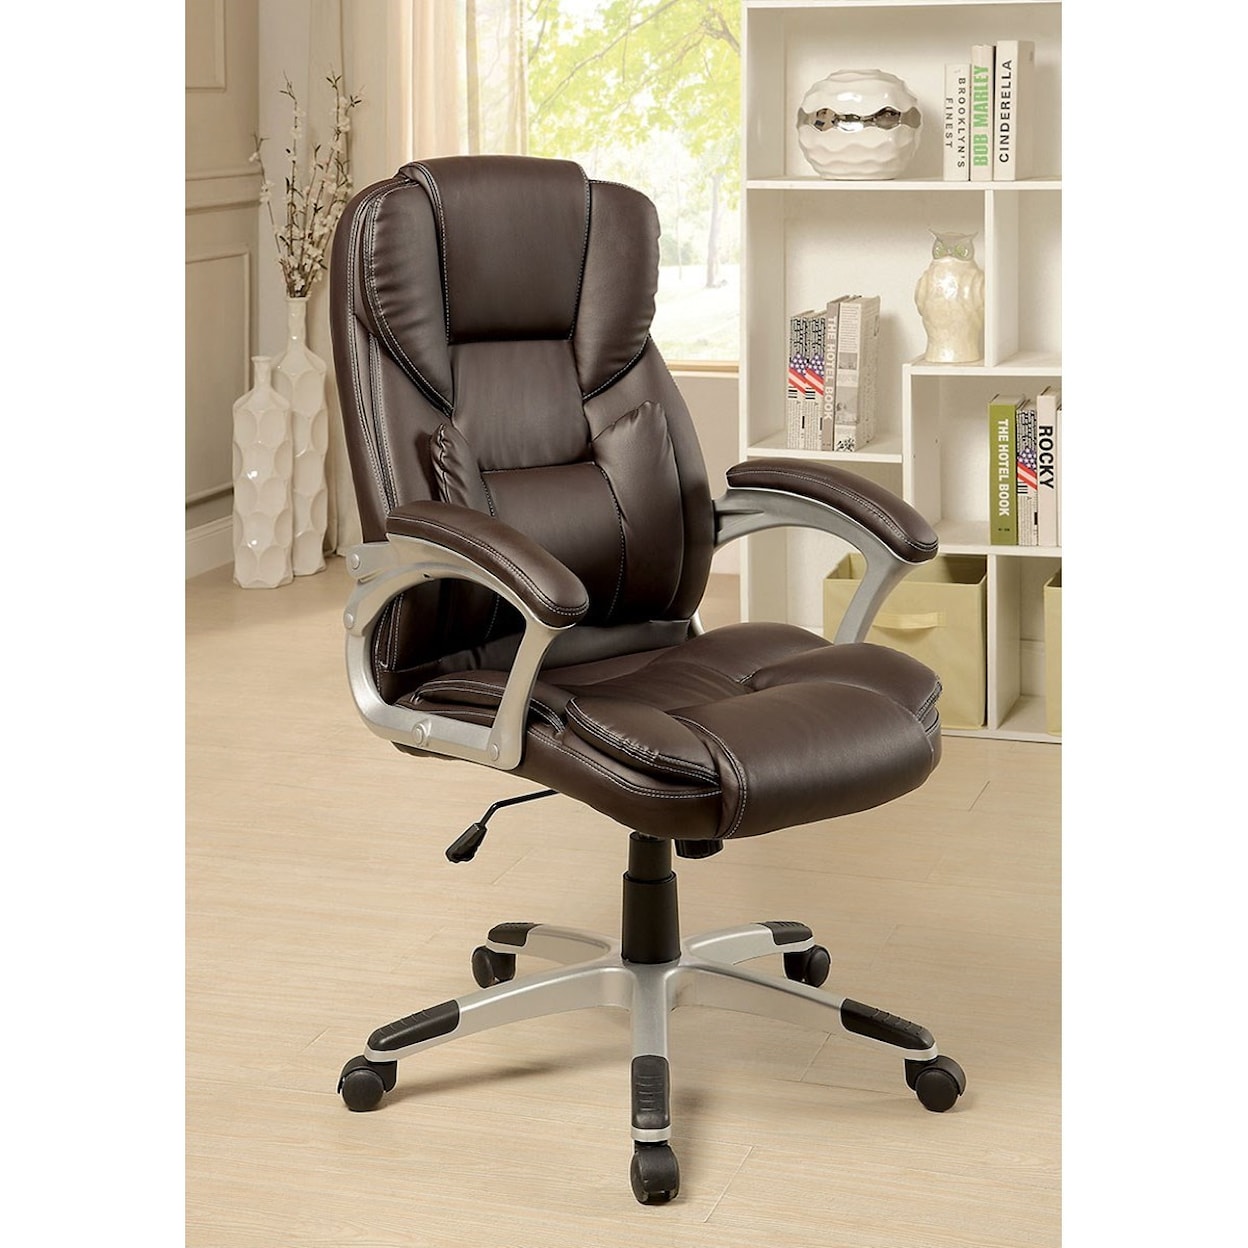 Furniture of America Sibley Office Chair